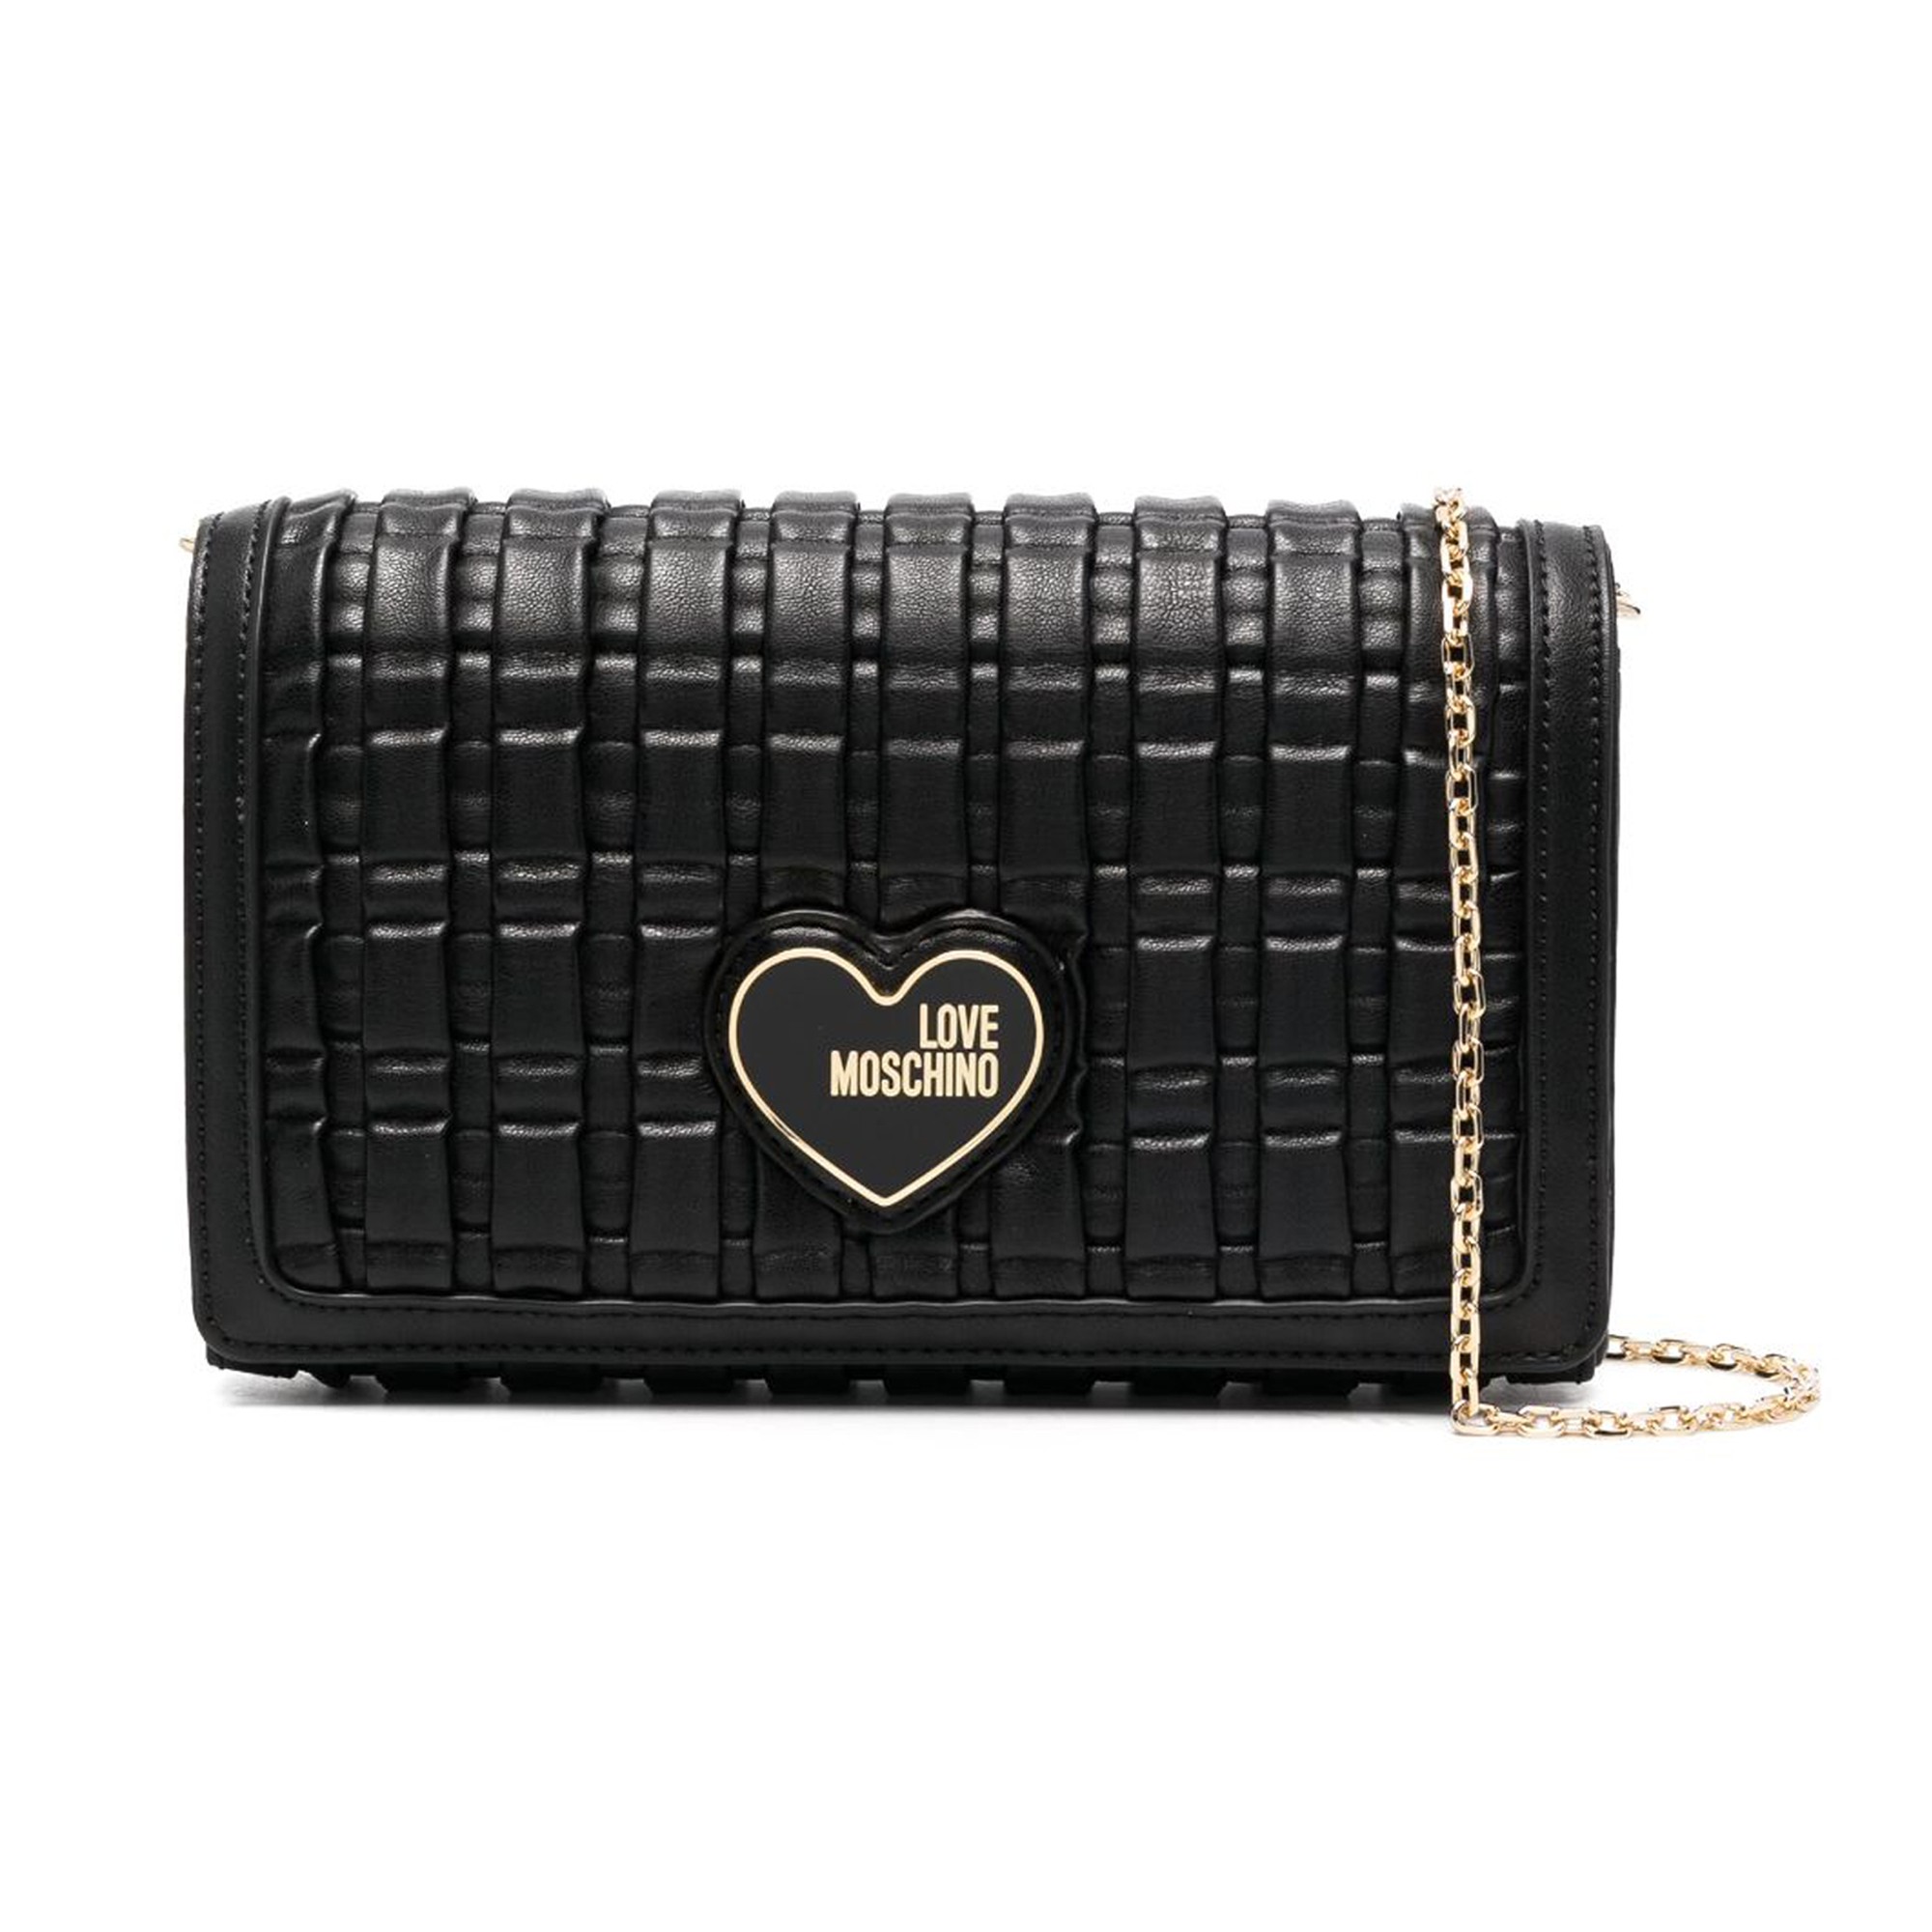 Love Moschino quilted shoulder bag with chunky strap | Quilted shoulder bags,  Shoulder bag, Bags